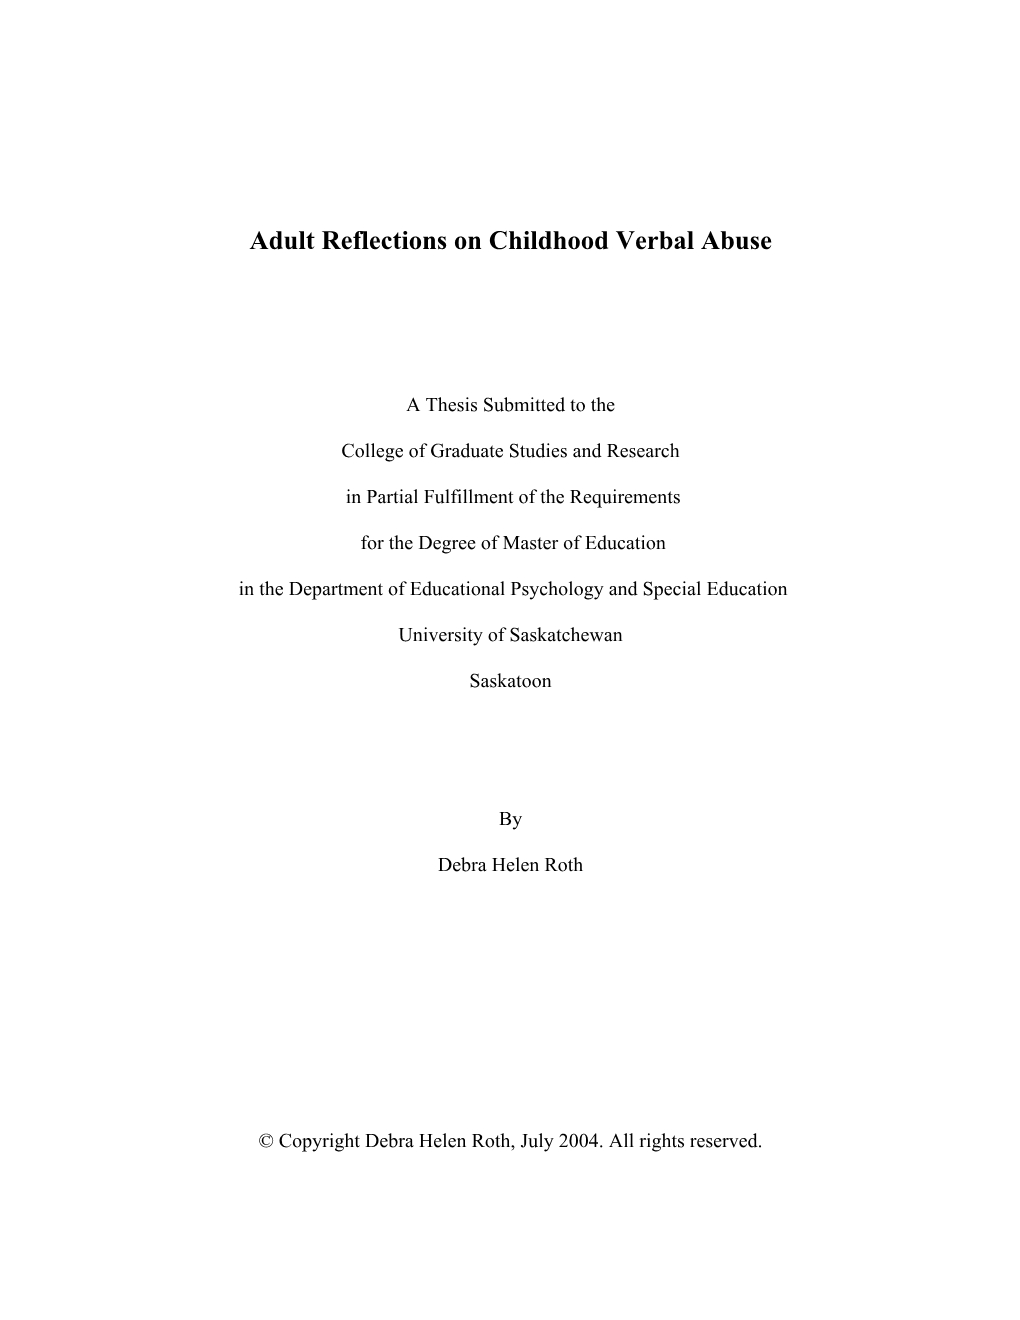 Adult Reflections on Childhood Verbal Abuse